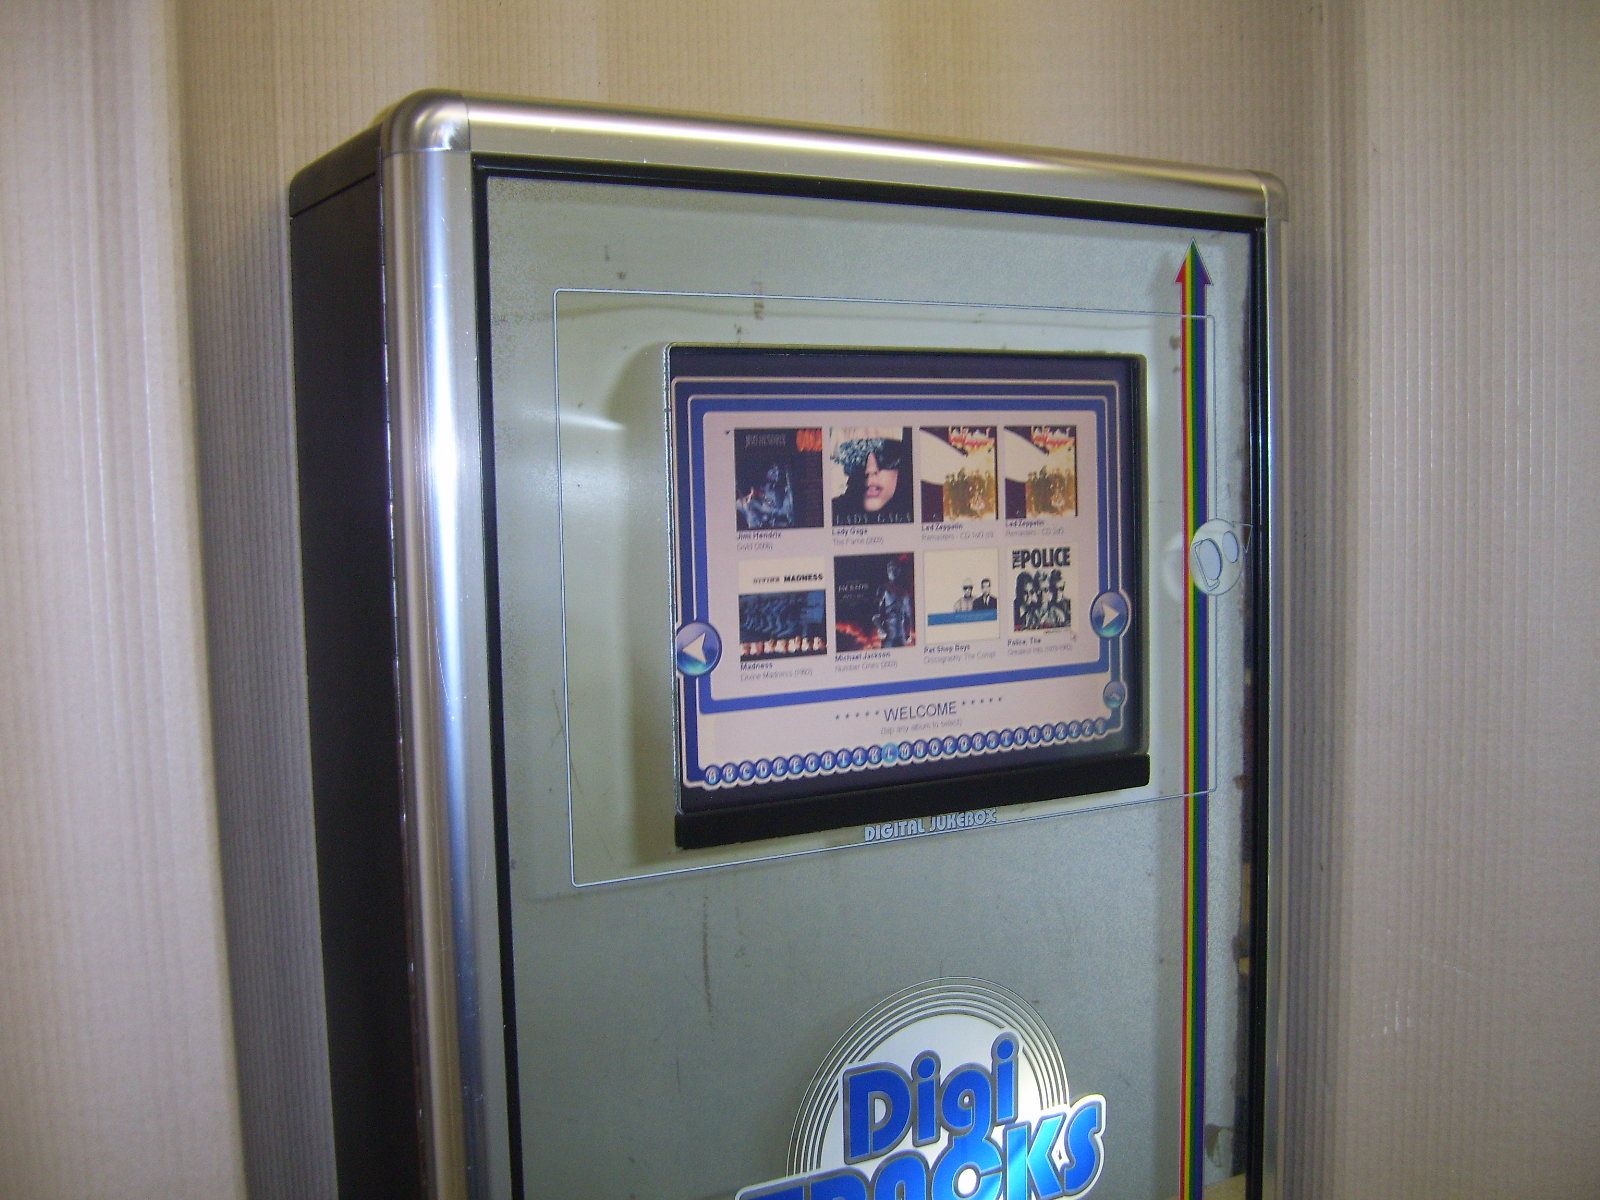 touch screen jukebox software